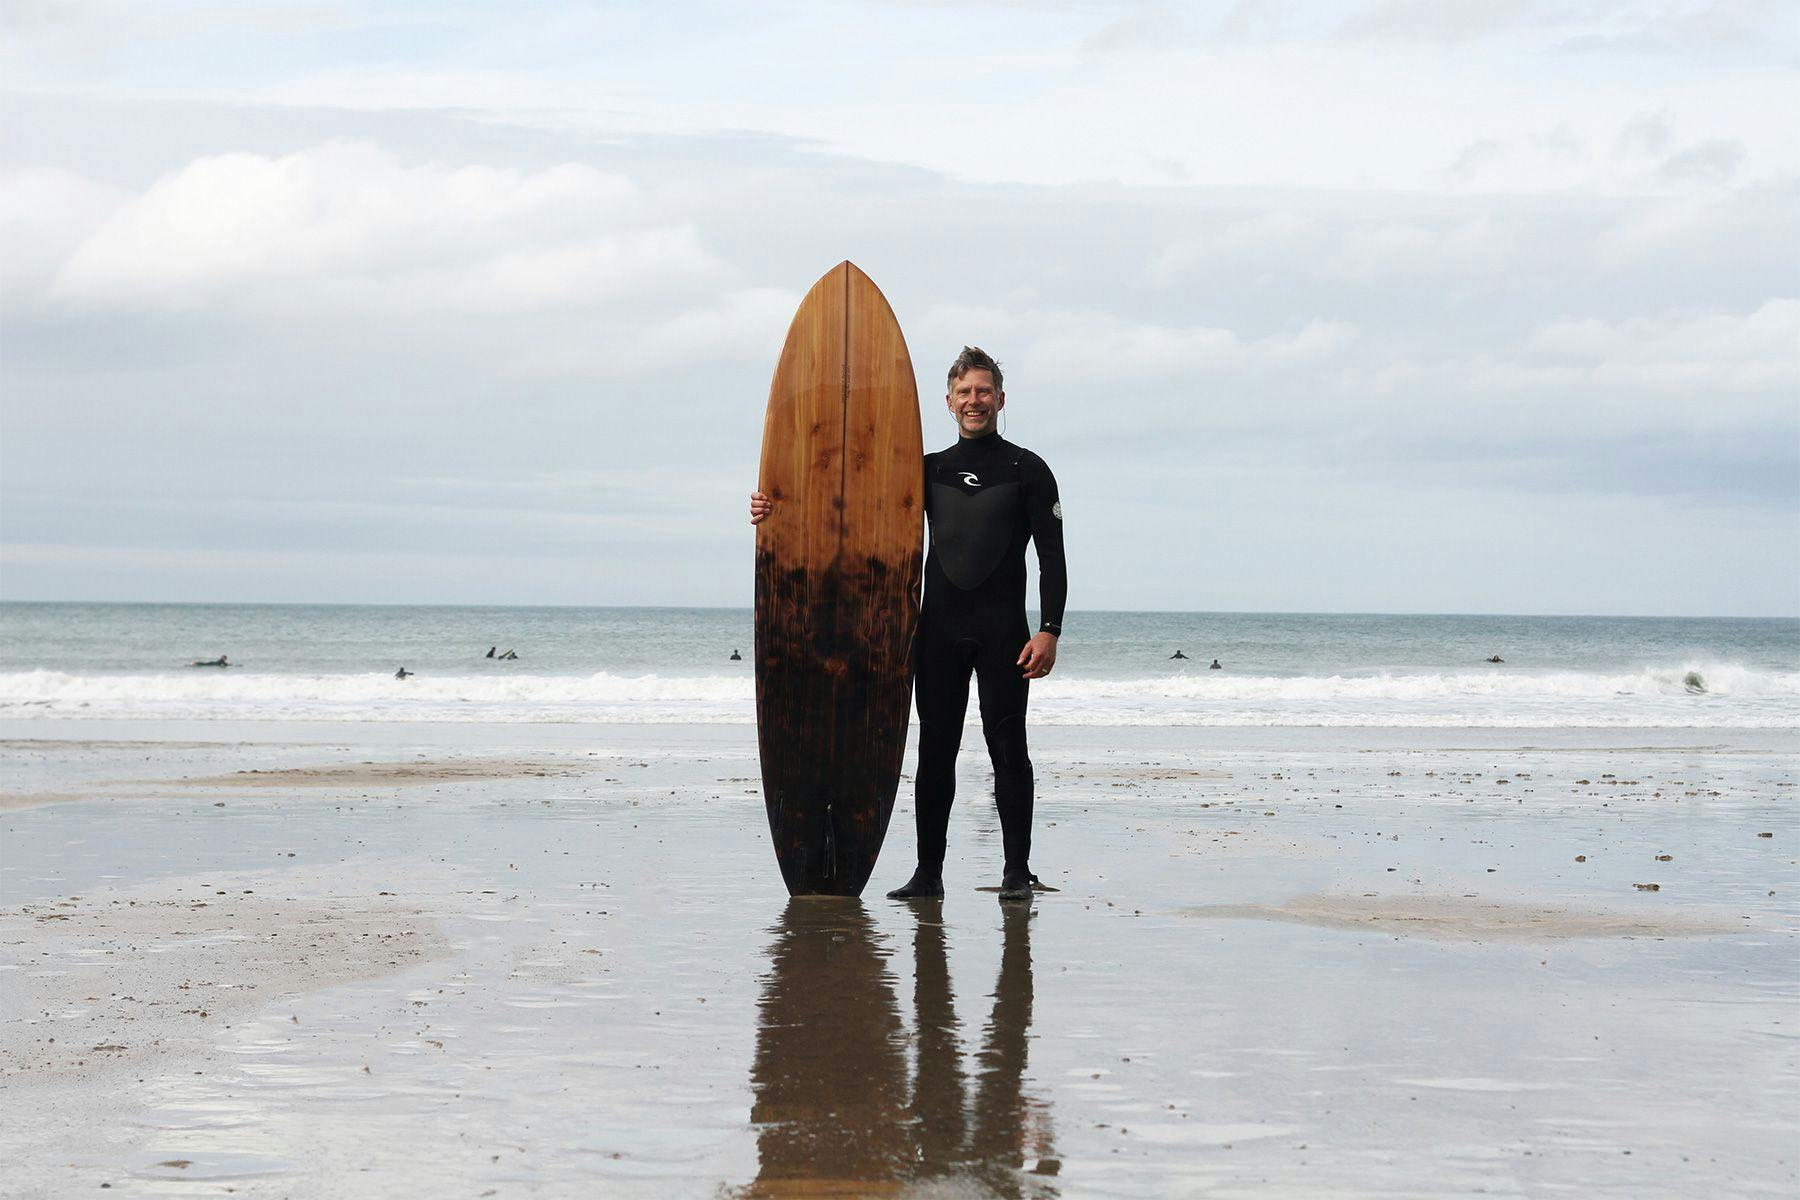 Ben with the shou sugi ban wooden surfboard that he made with Otter Surfboards